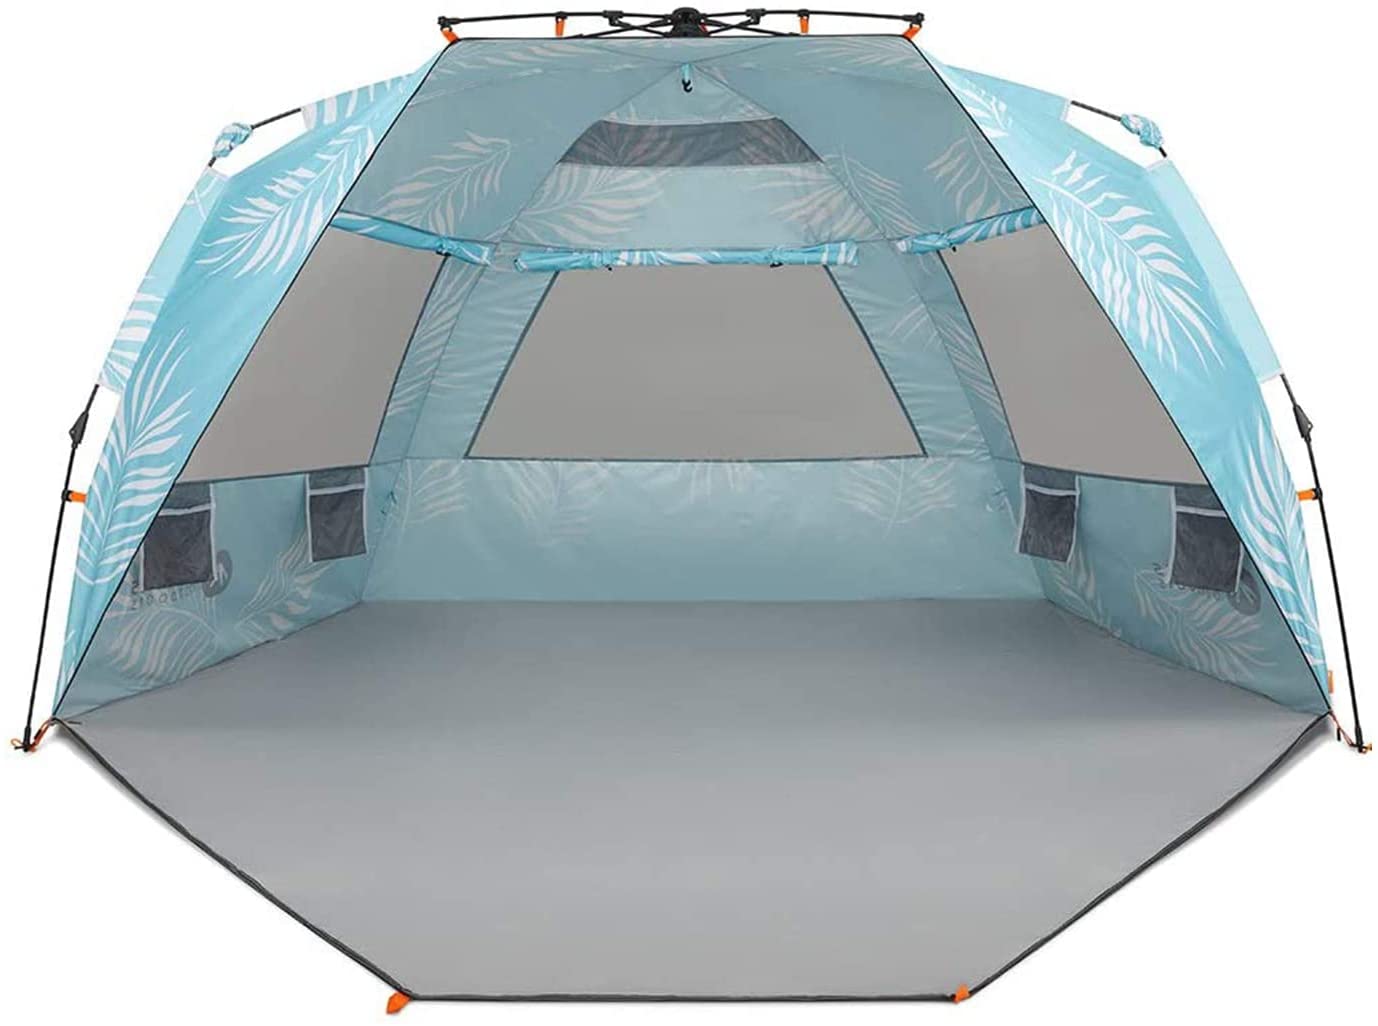 Easthills Outdoors Instant Shader Enhanced Deluxe XL Beach Tent 